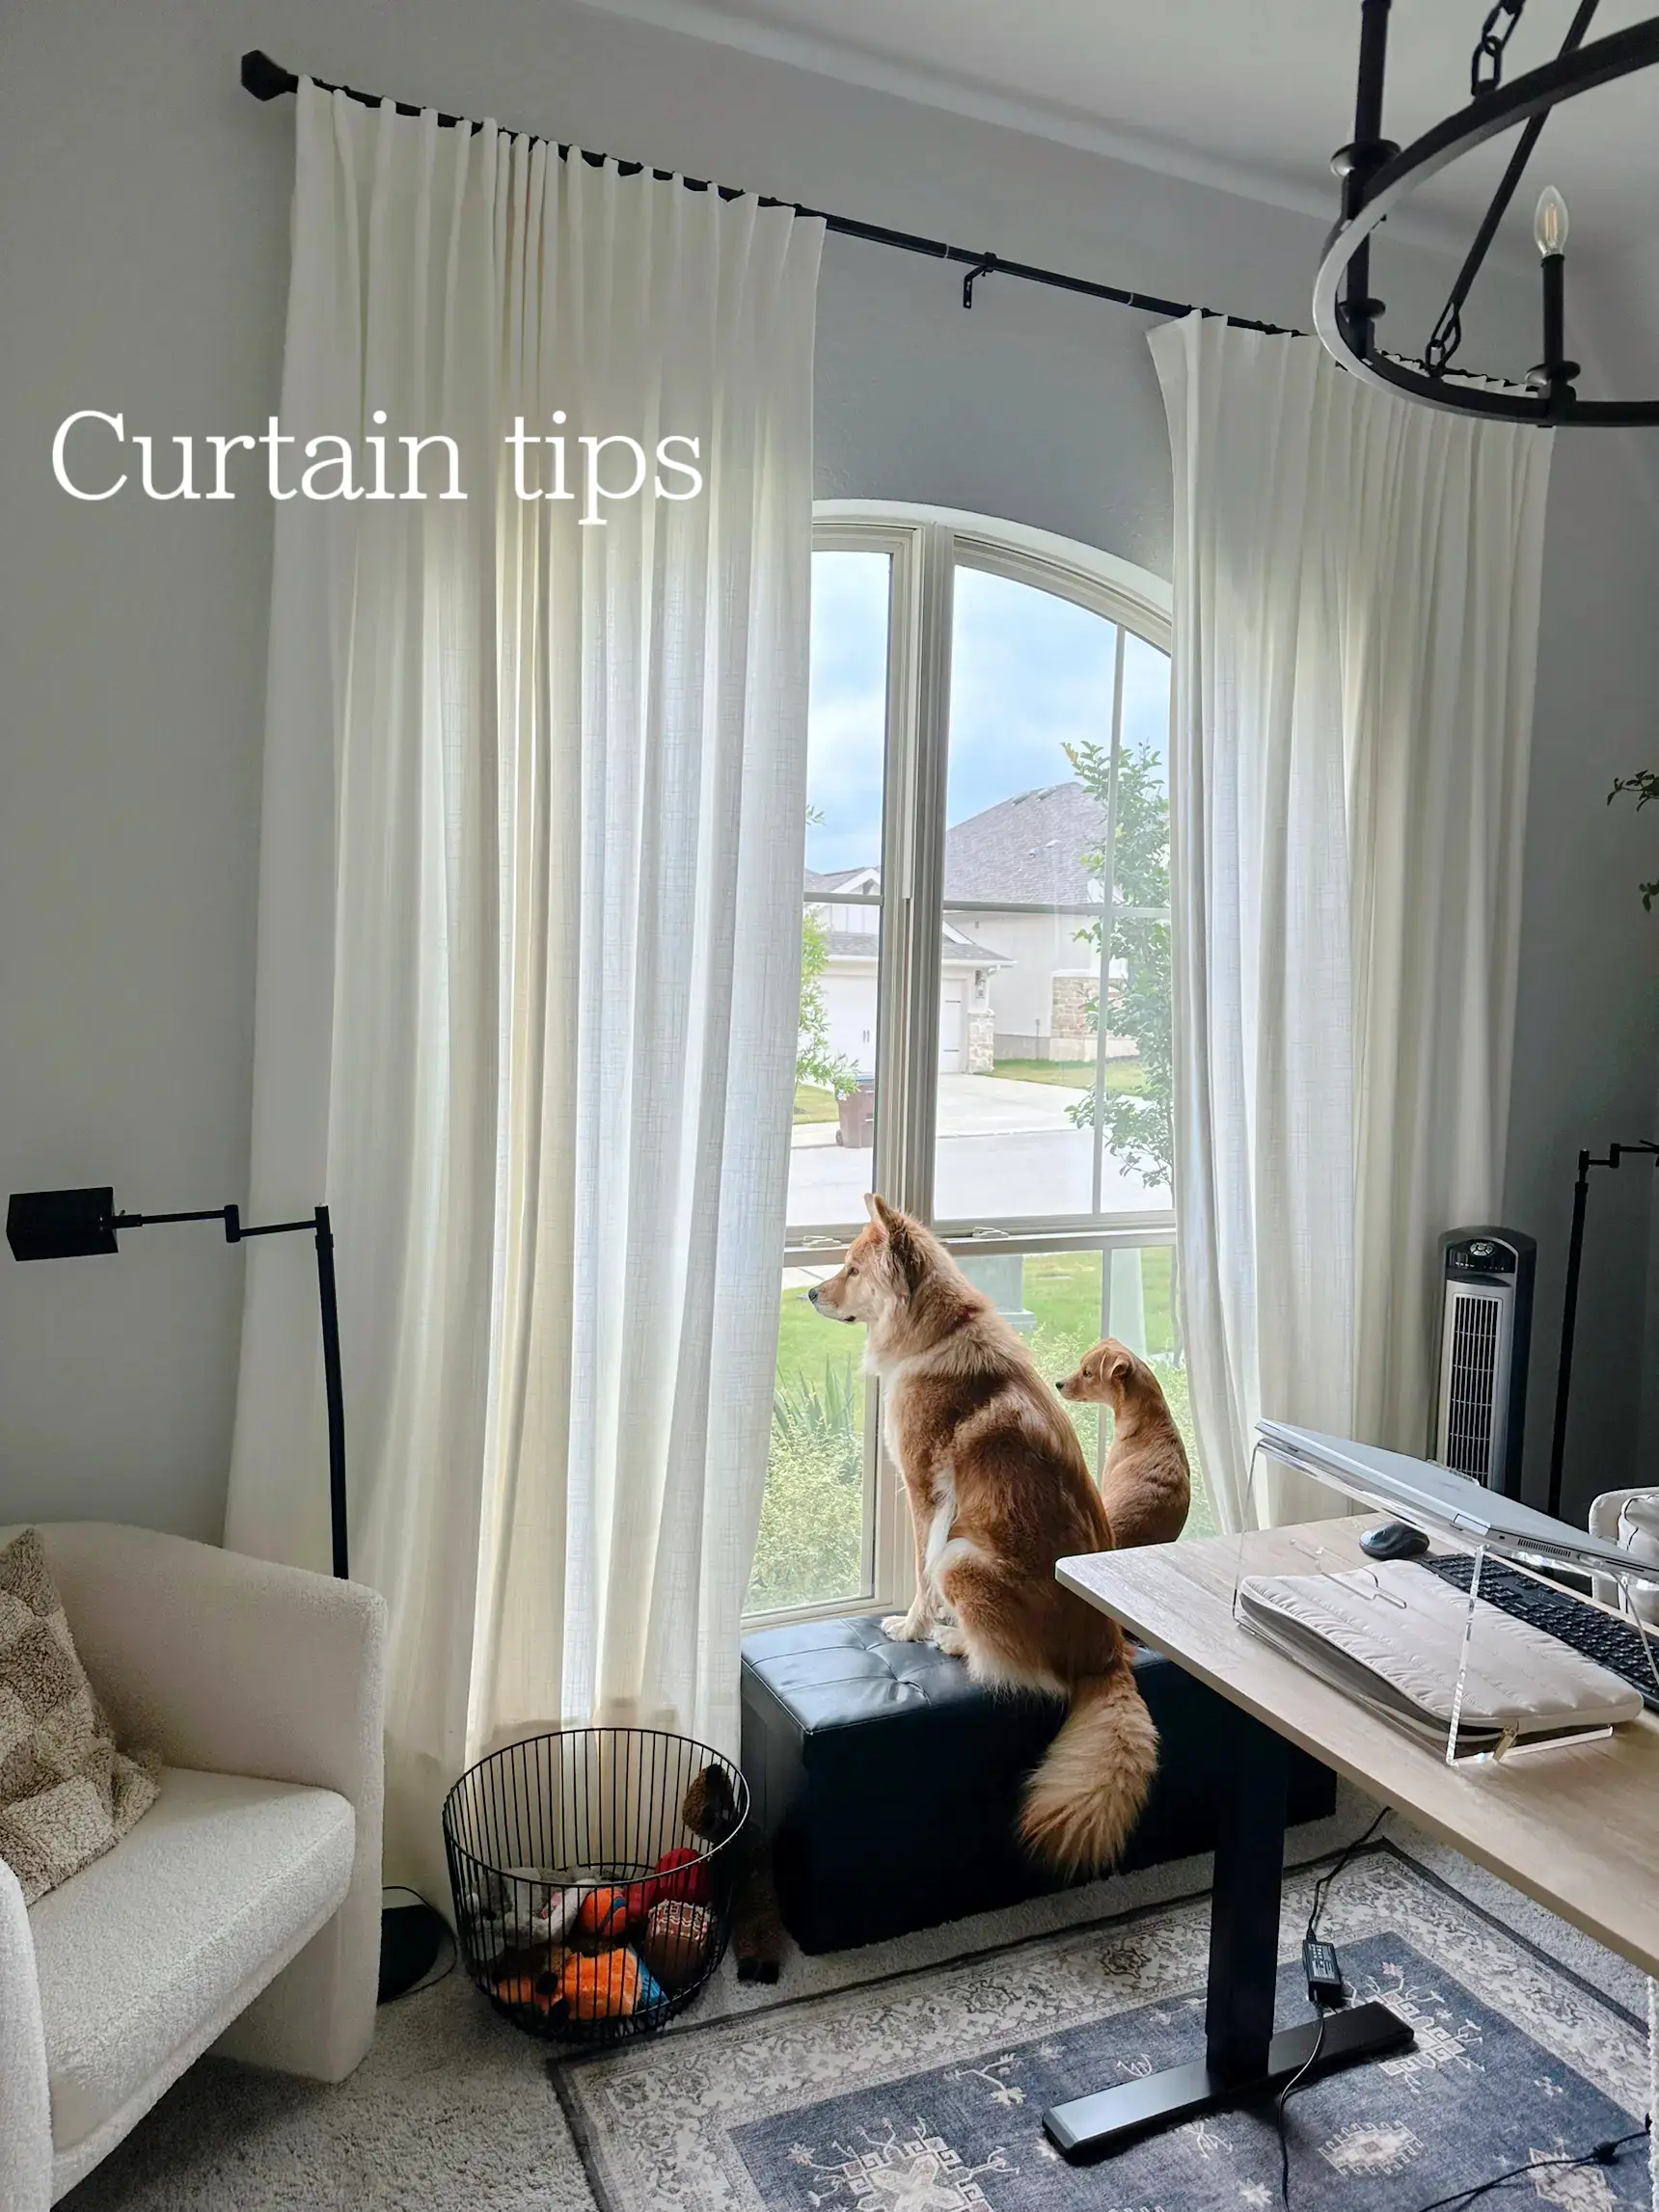 Curtains tips to make the most of your windows ☀️, Gallery posted by Tara  Skinner